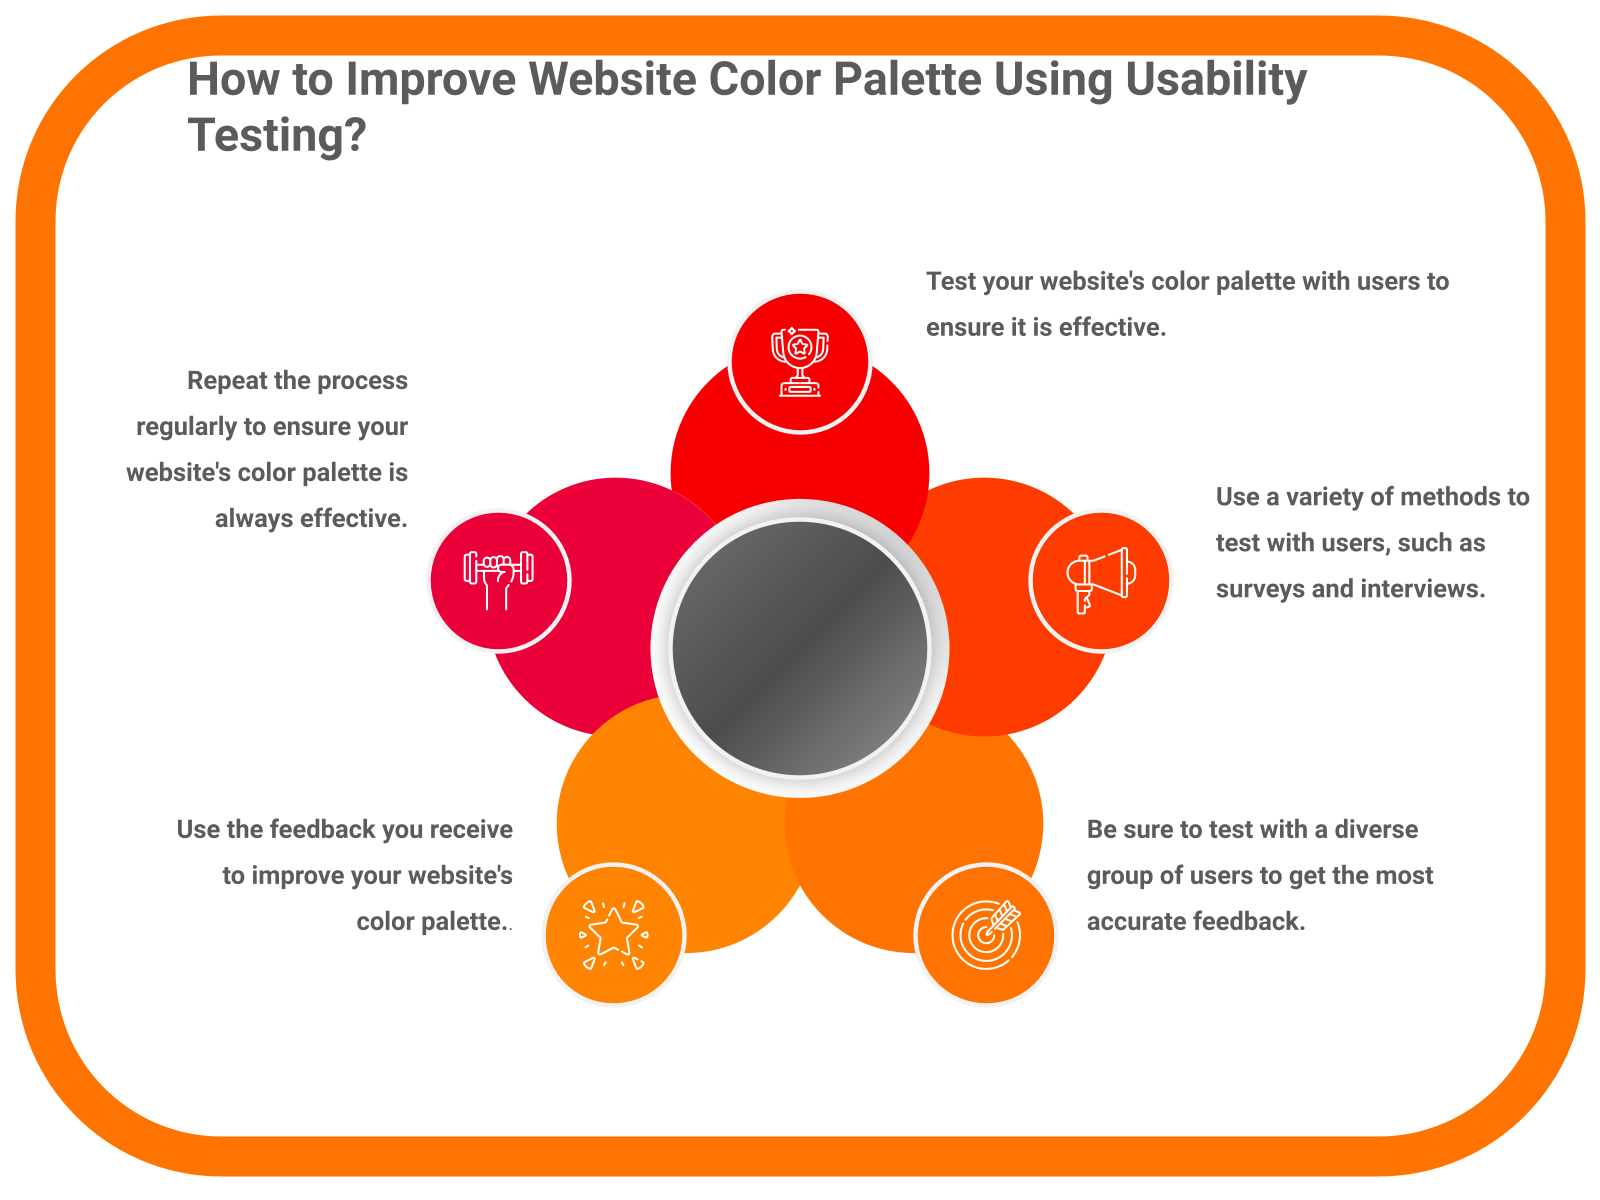 How to Improve Website Color Palette Using Usability Testing?